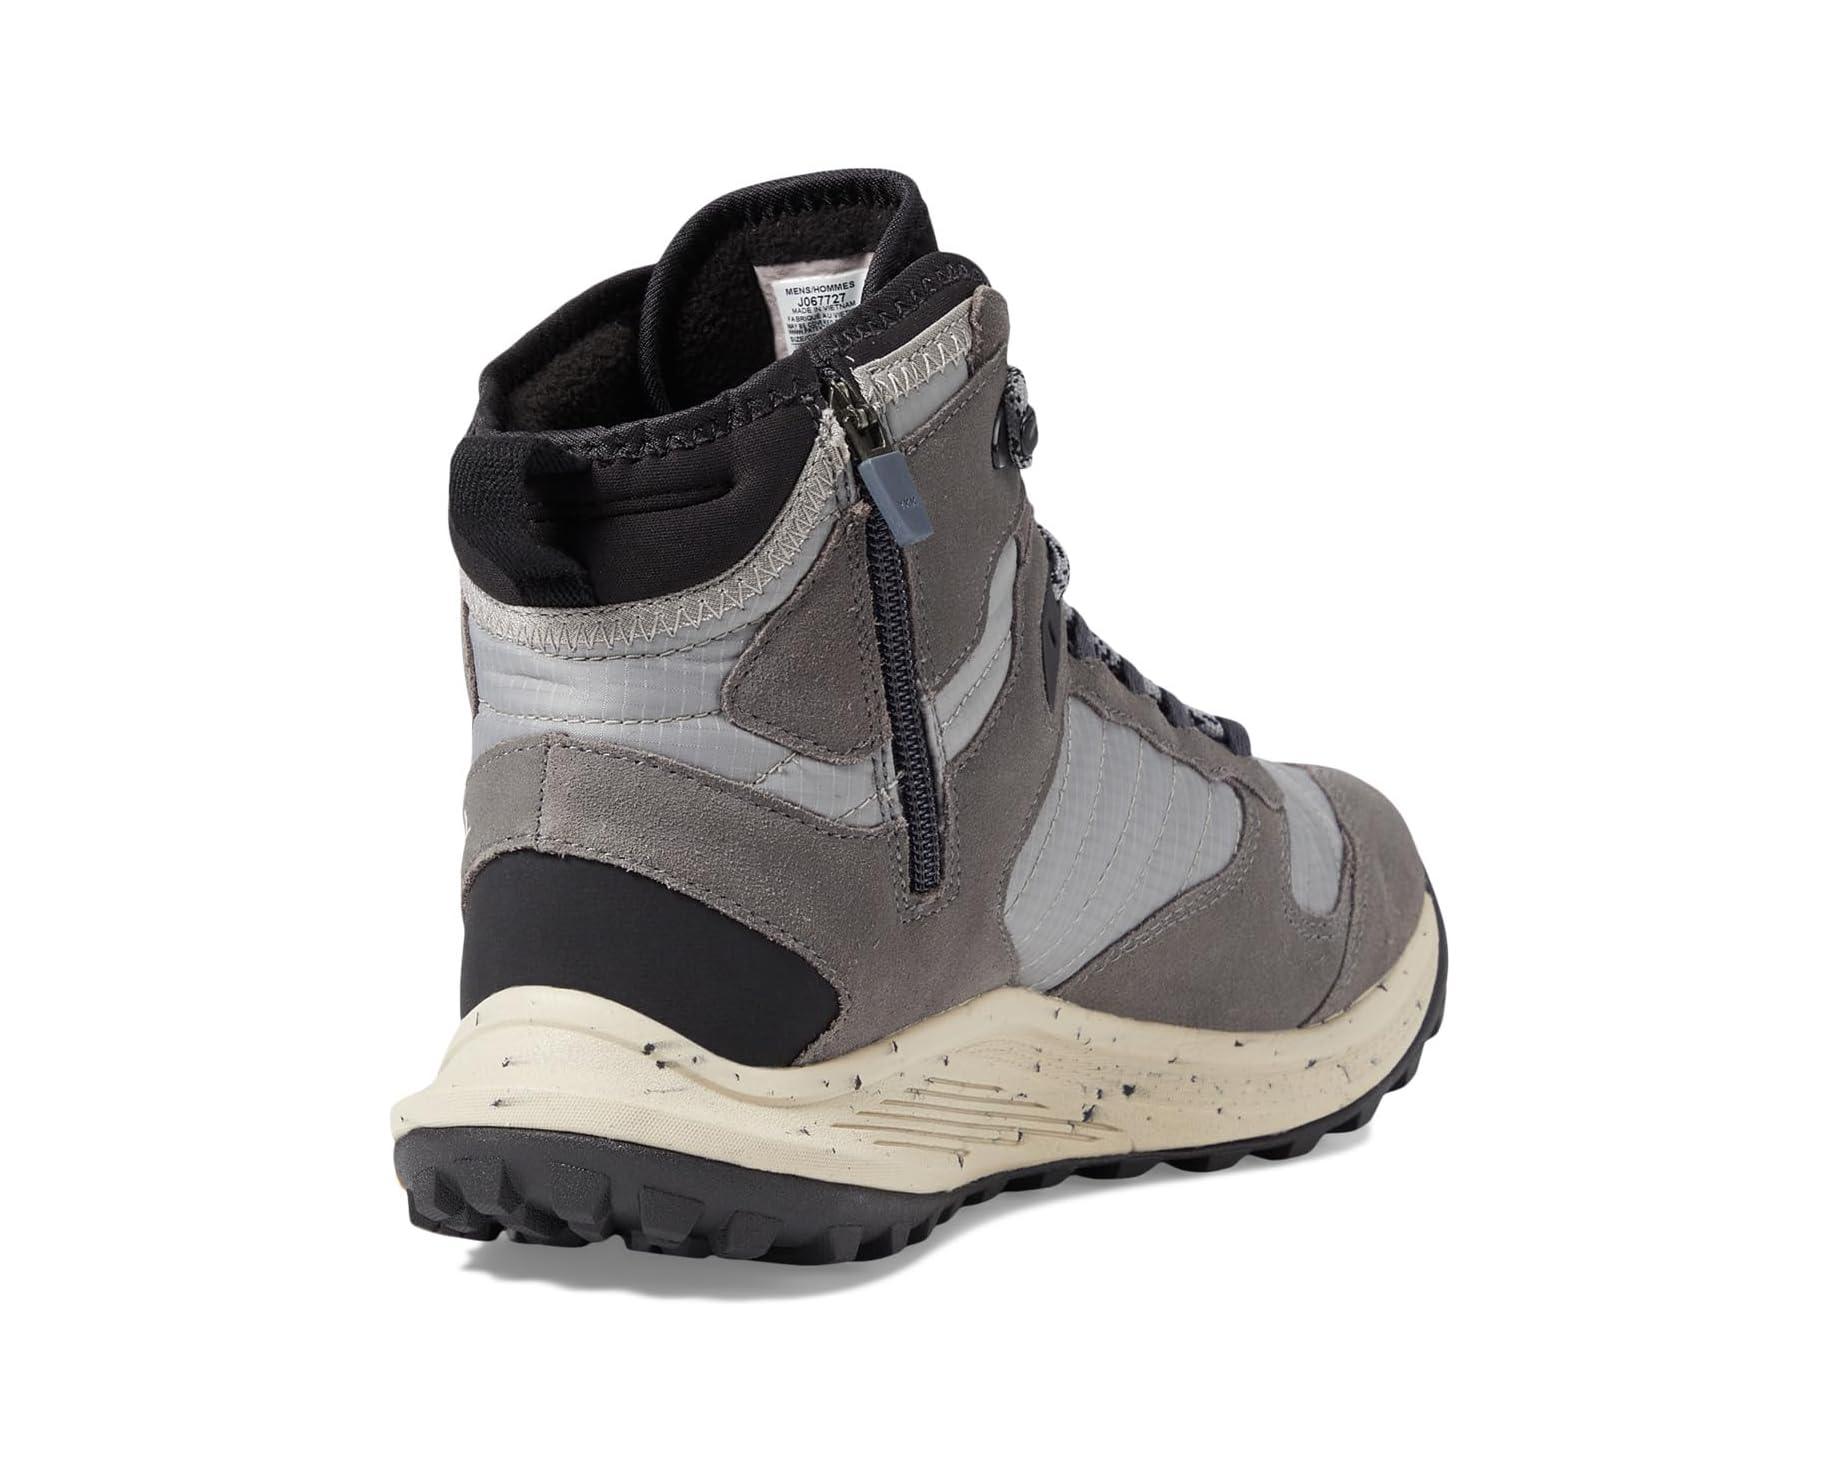 Merrell - Merrell Men’s Nova 3 Thermo Insulated Mid Boot - The Shoe Collective